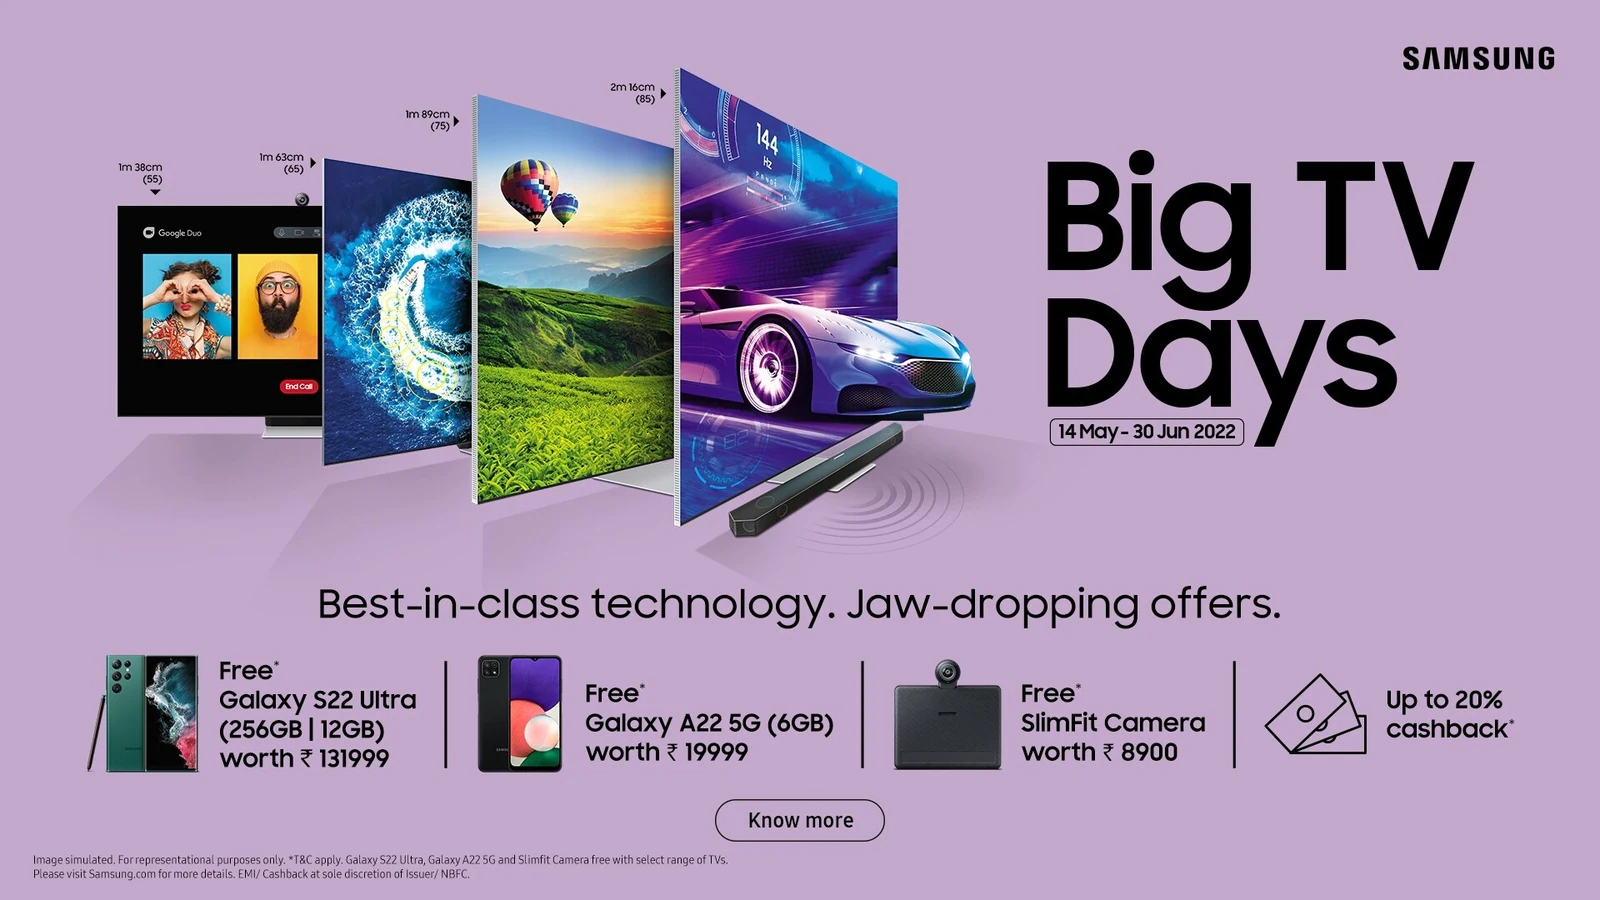 Samsung TV Direct Sale: Get great deals and guaranteed free offers on big screen TVs

